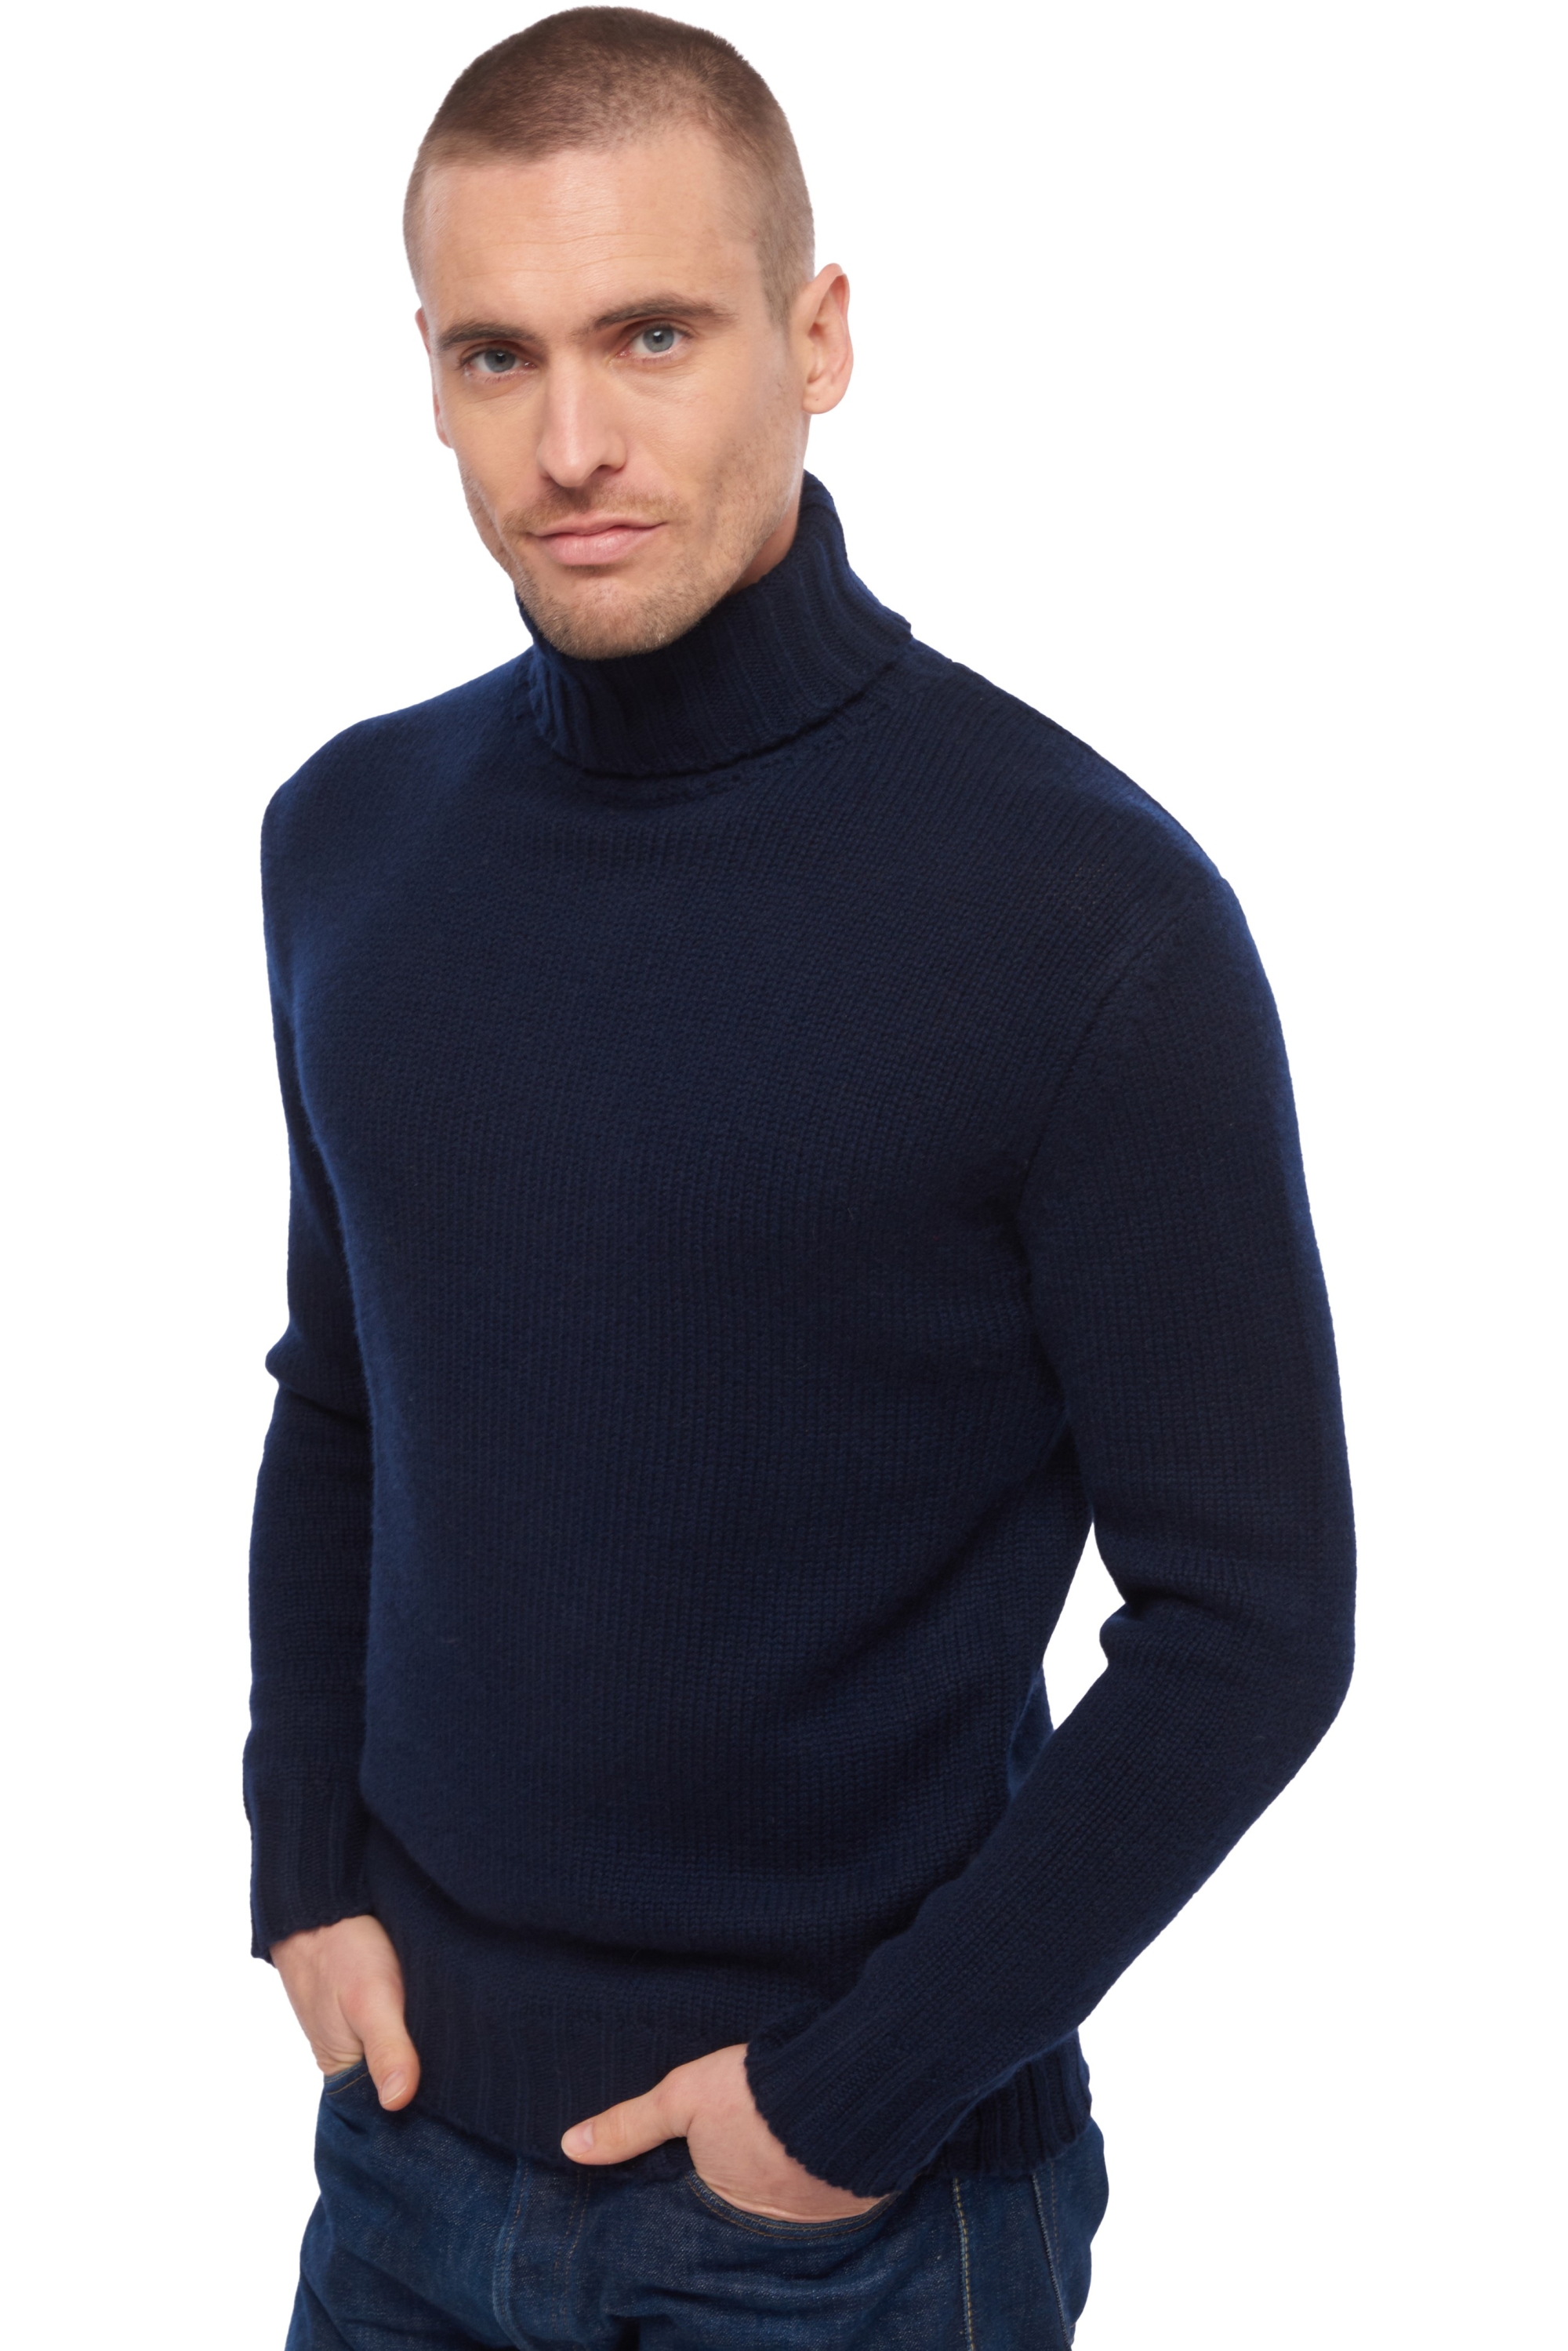 Cachemire pull homme achille marine fonce xs